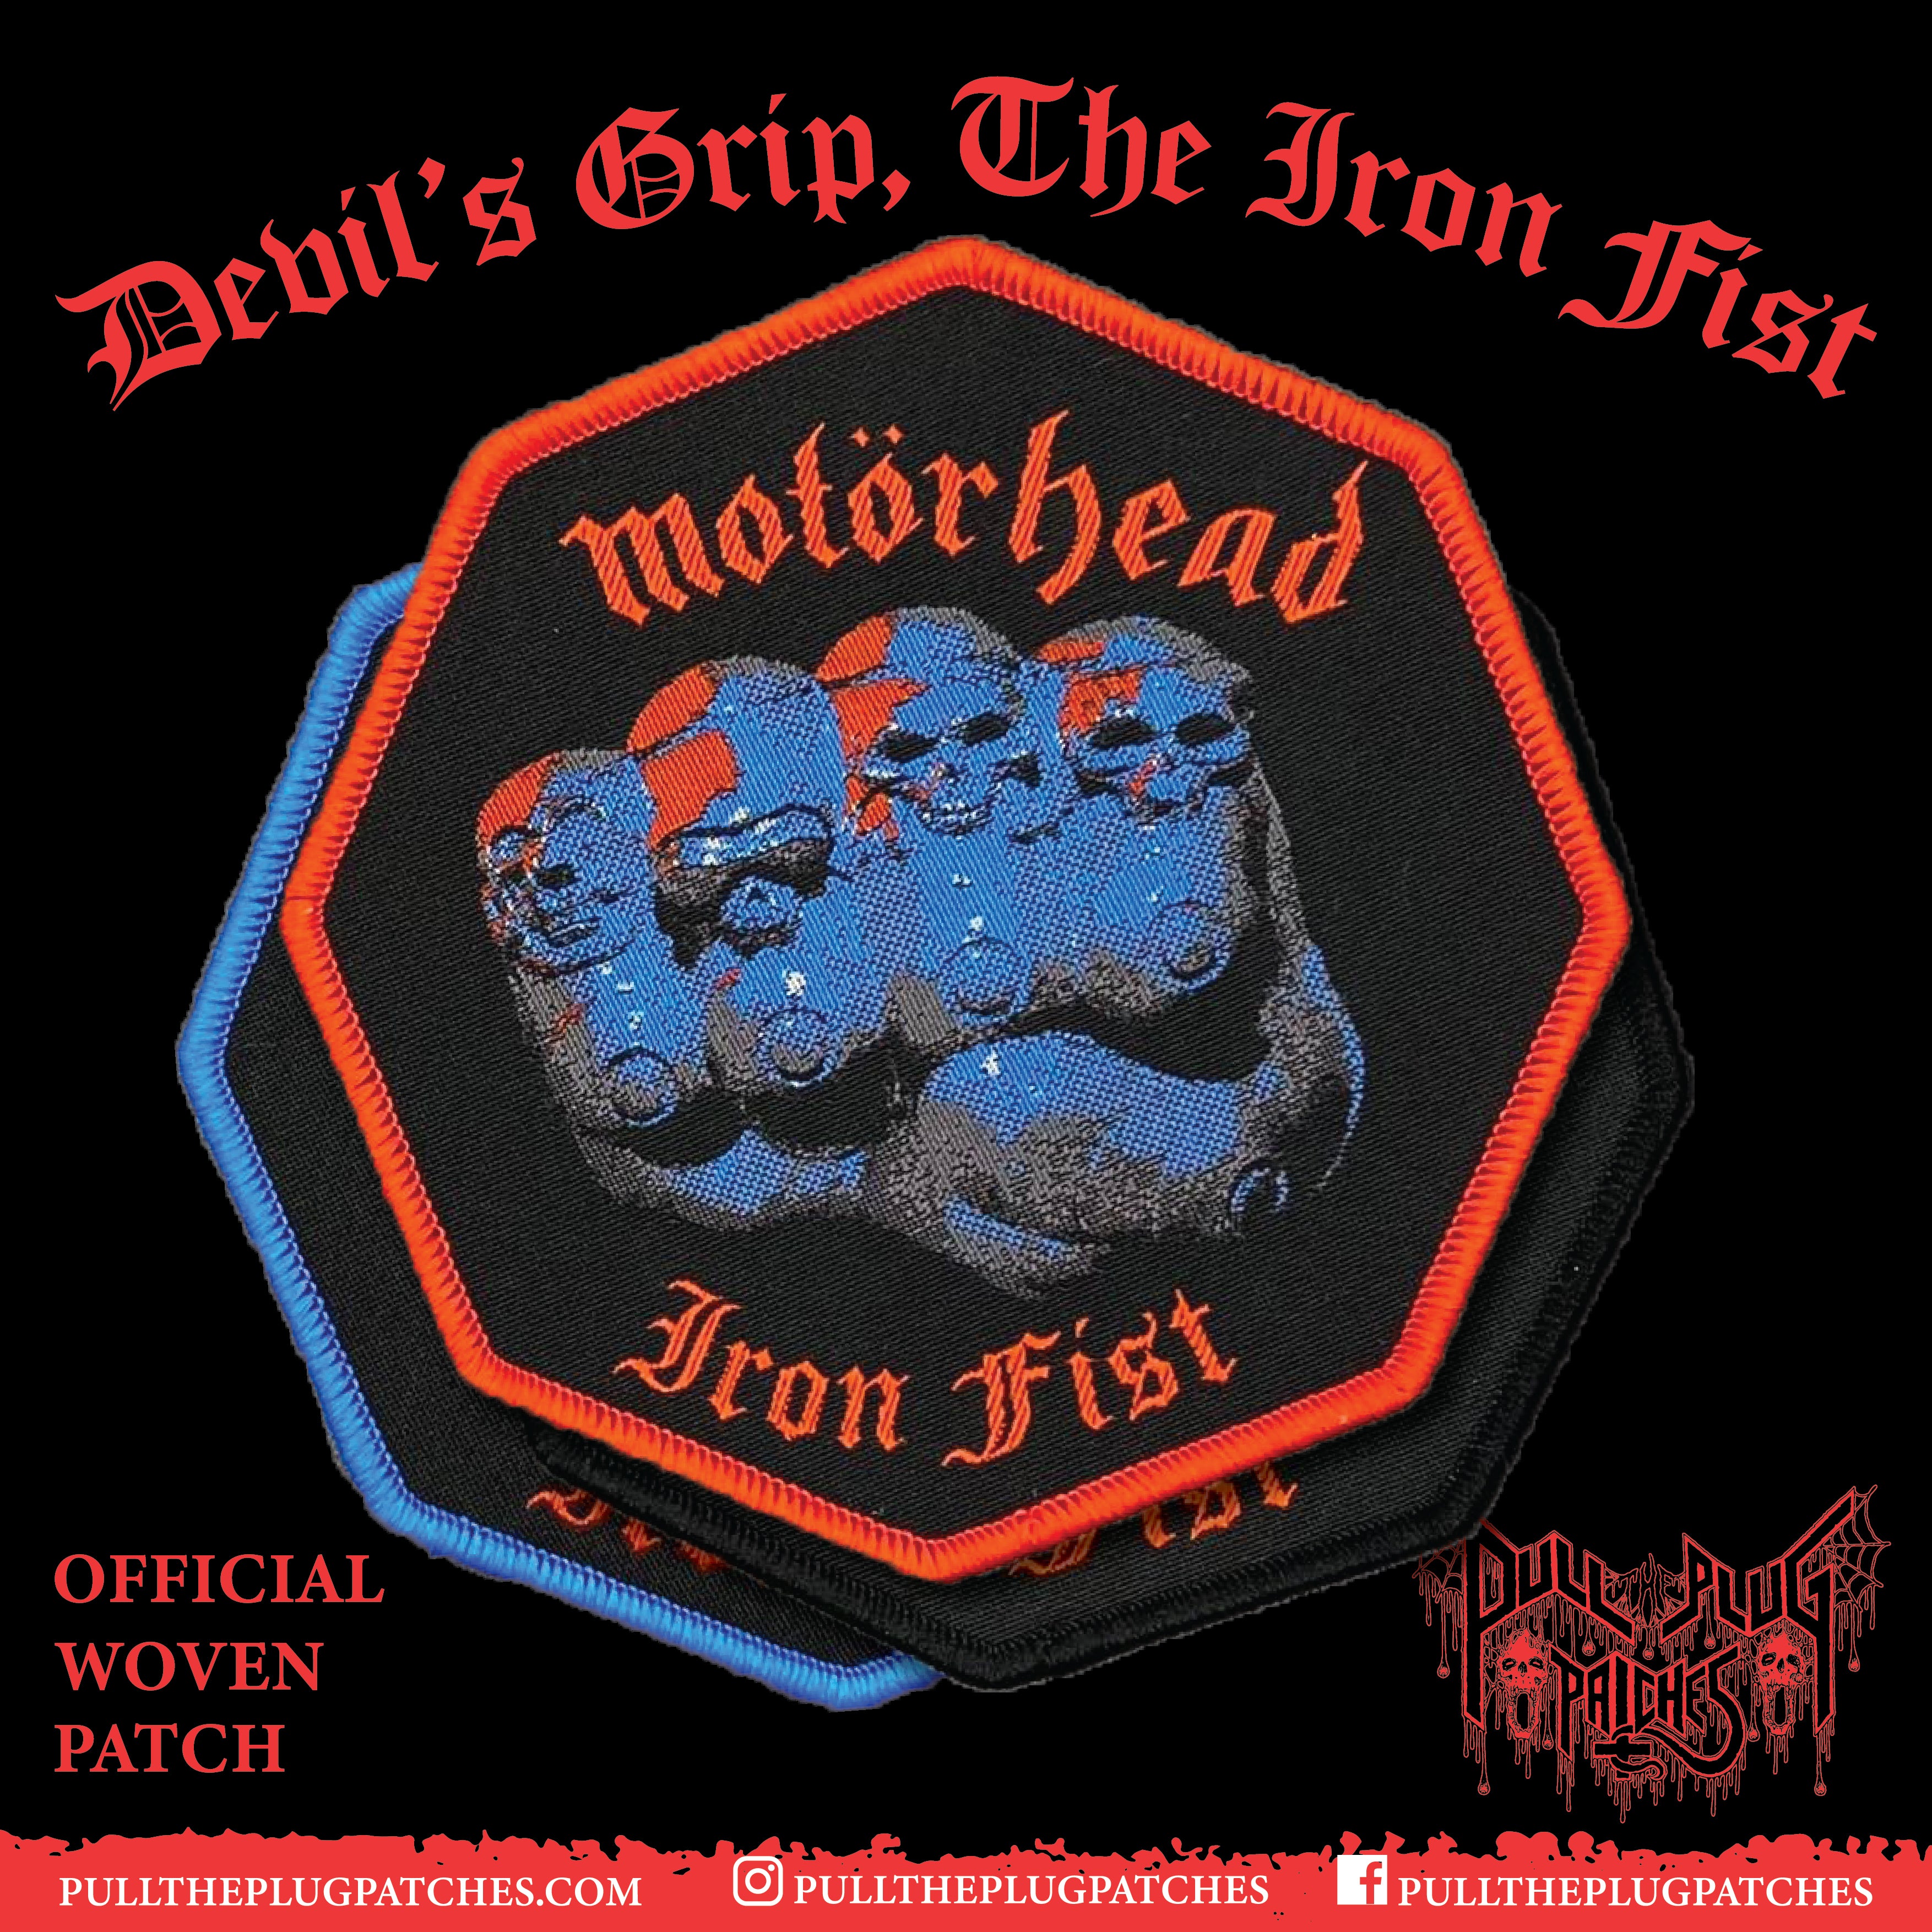 Motorhead Iron Fist Large Back Patch Official Licensed Heavy 